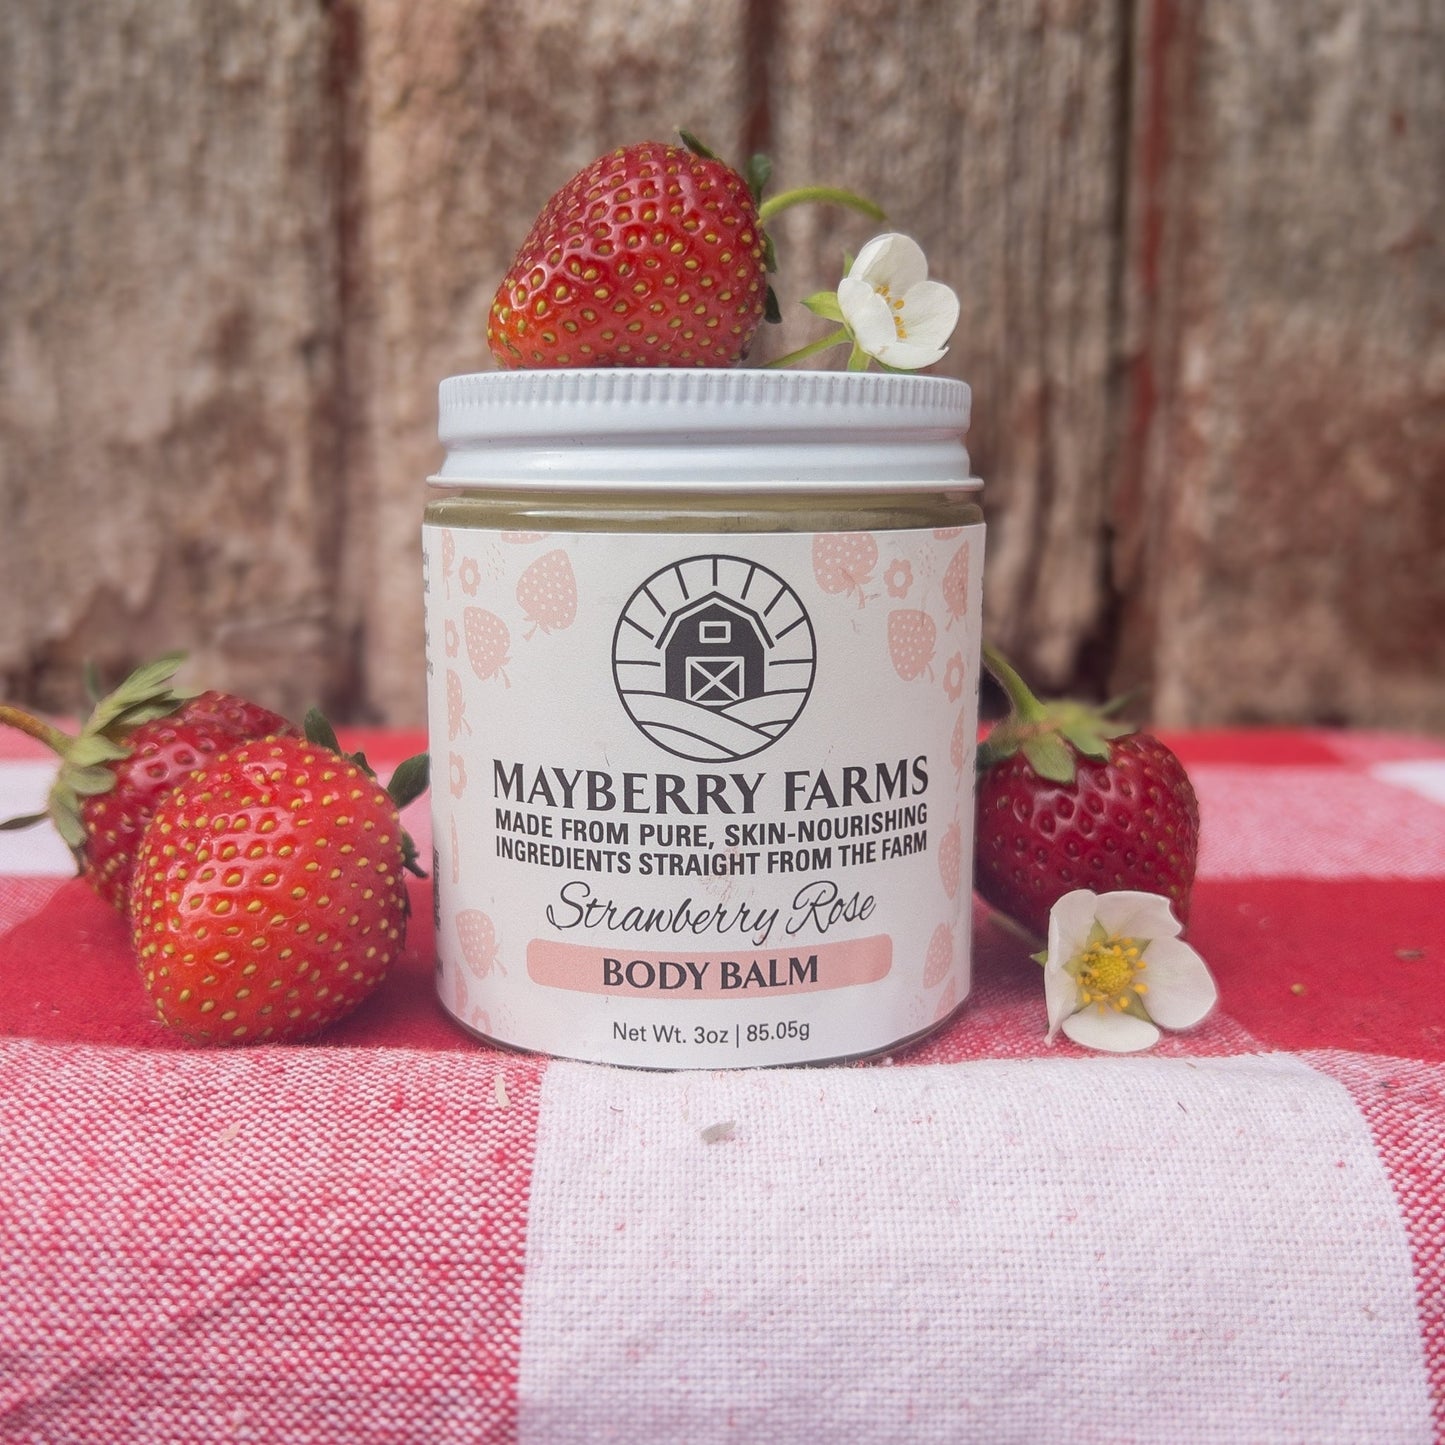 Strawberry Rose Body Balm - Mayberry Farms